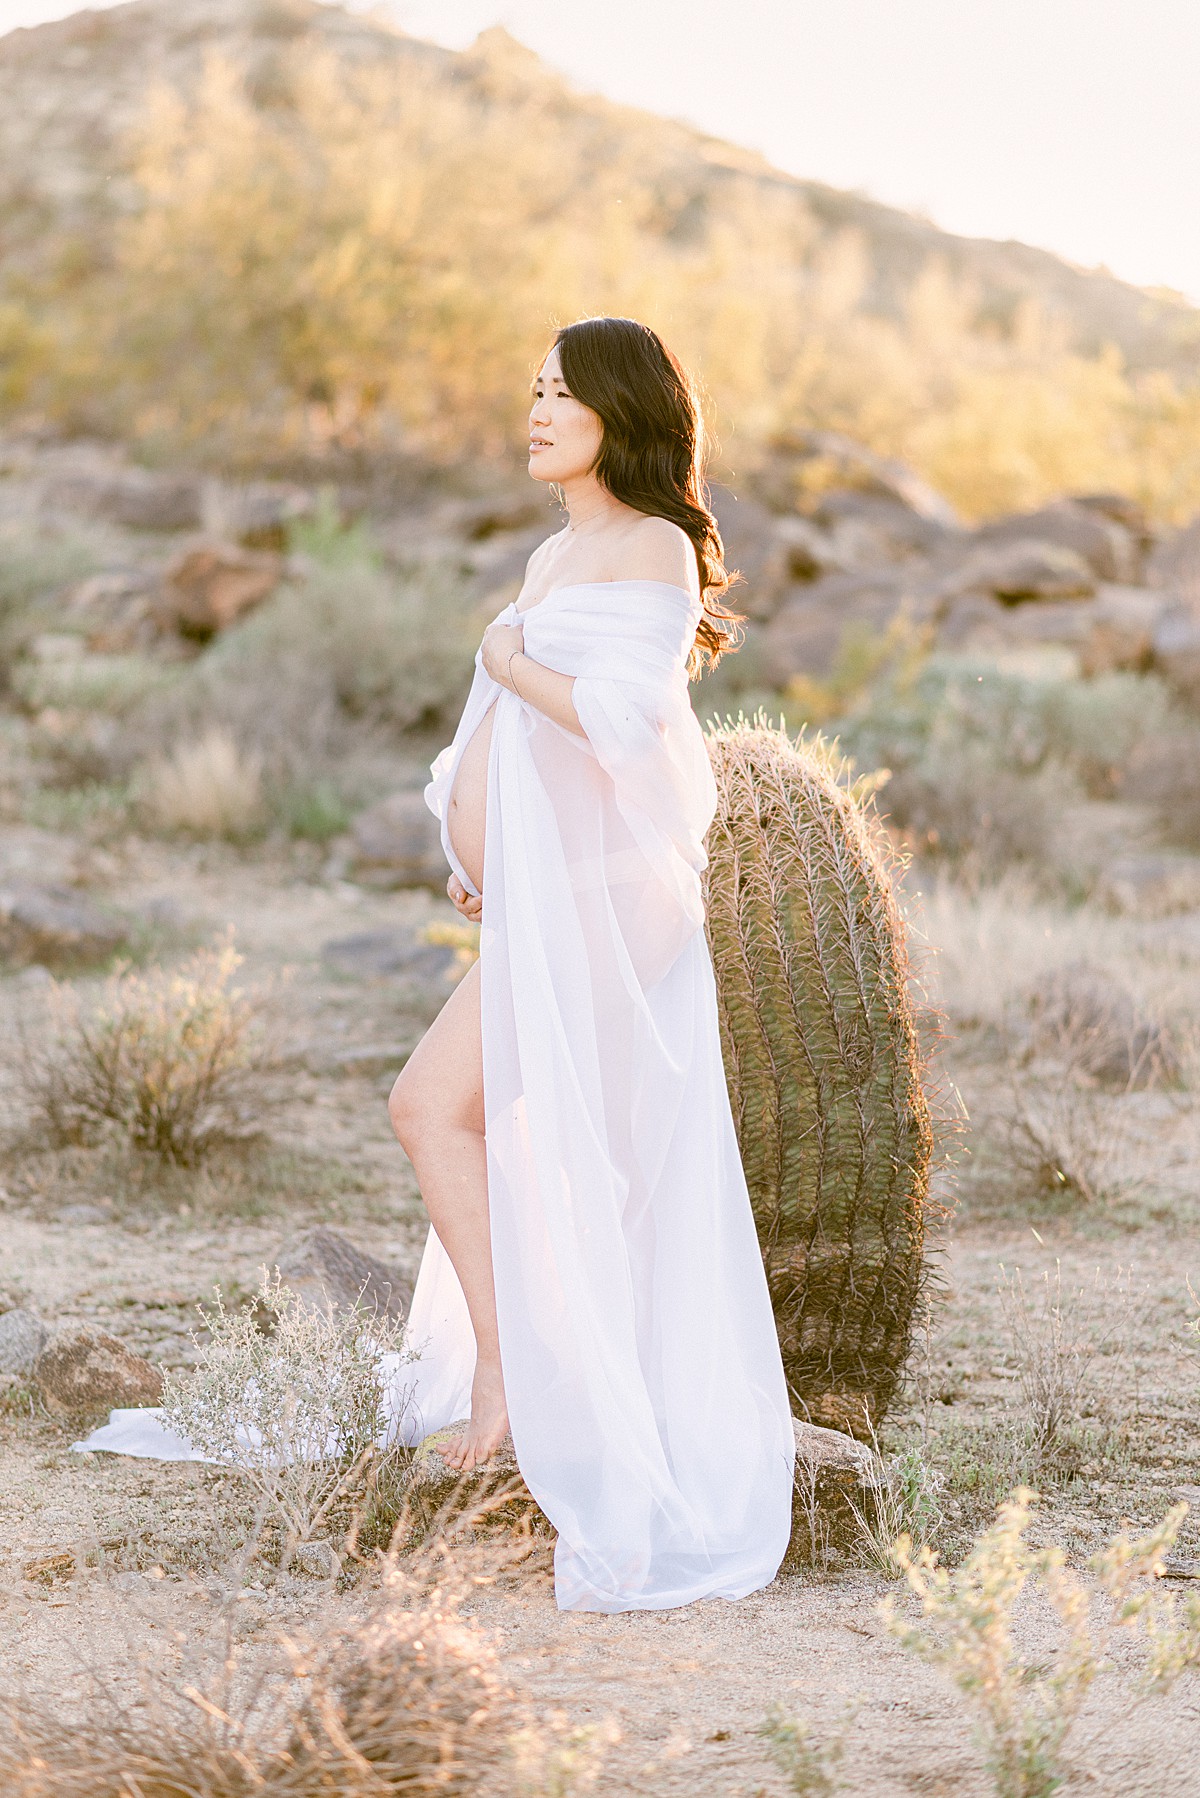 White chiffon fabric draped over pregnant woman with baby bump exposed. Standing next to cactus in Phoenix, AZ desert